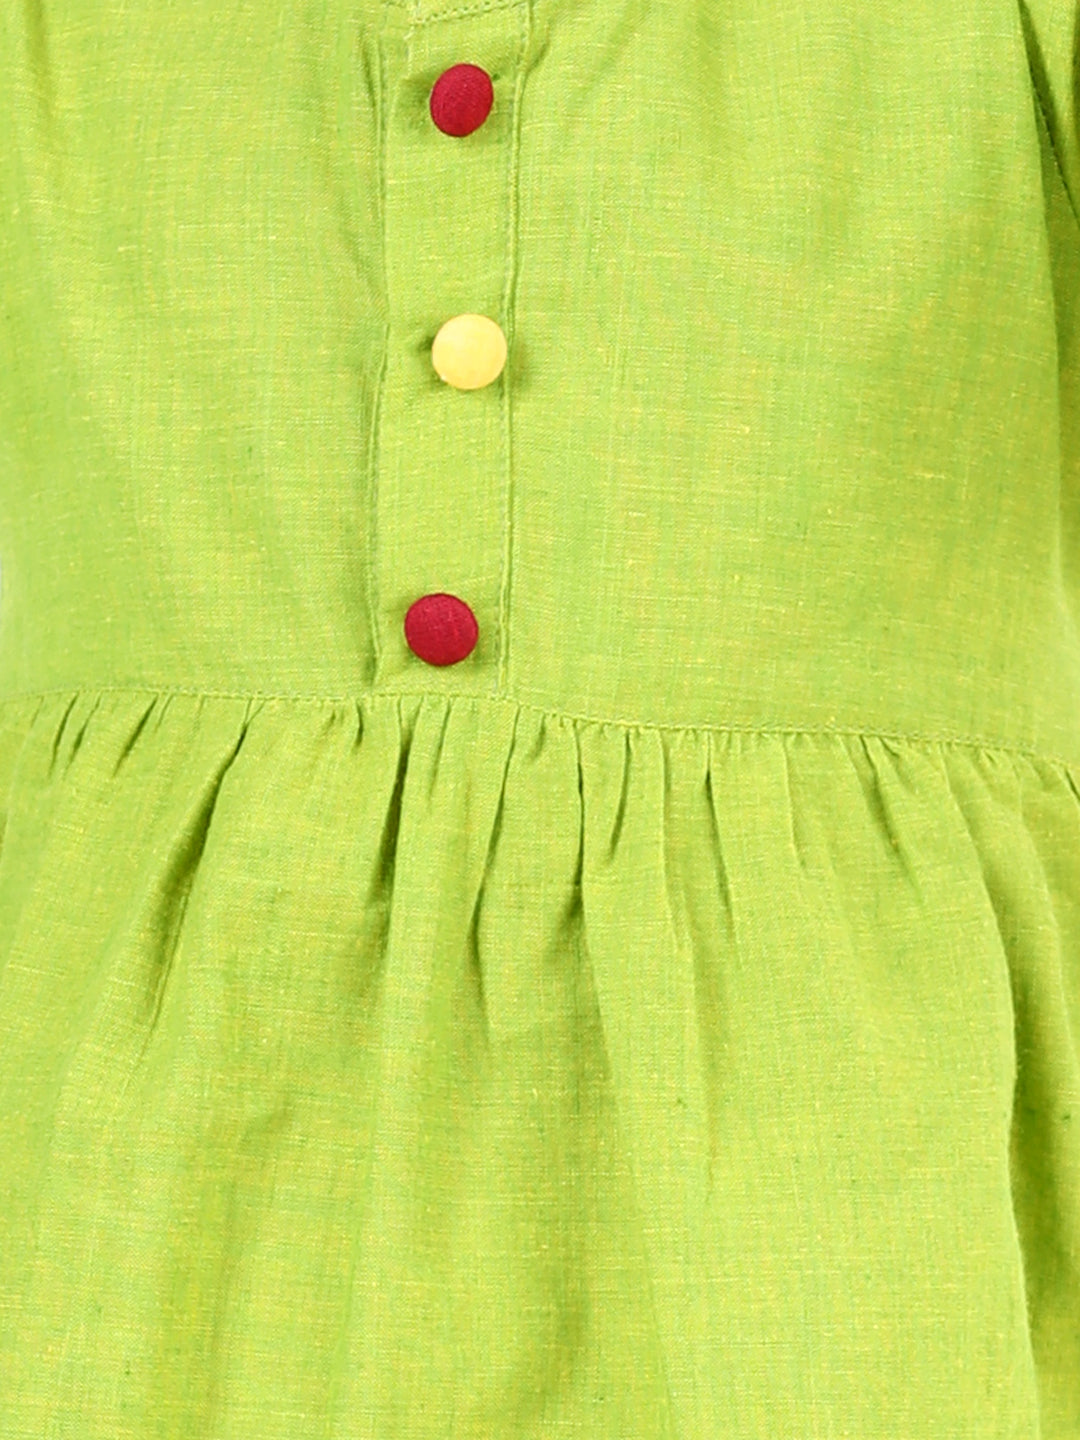 BownBee Multi Frill Cotton Frock with Headband for Girls- Green